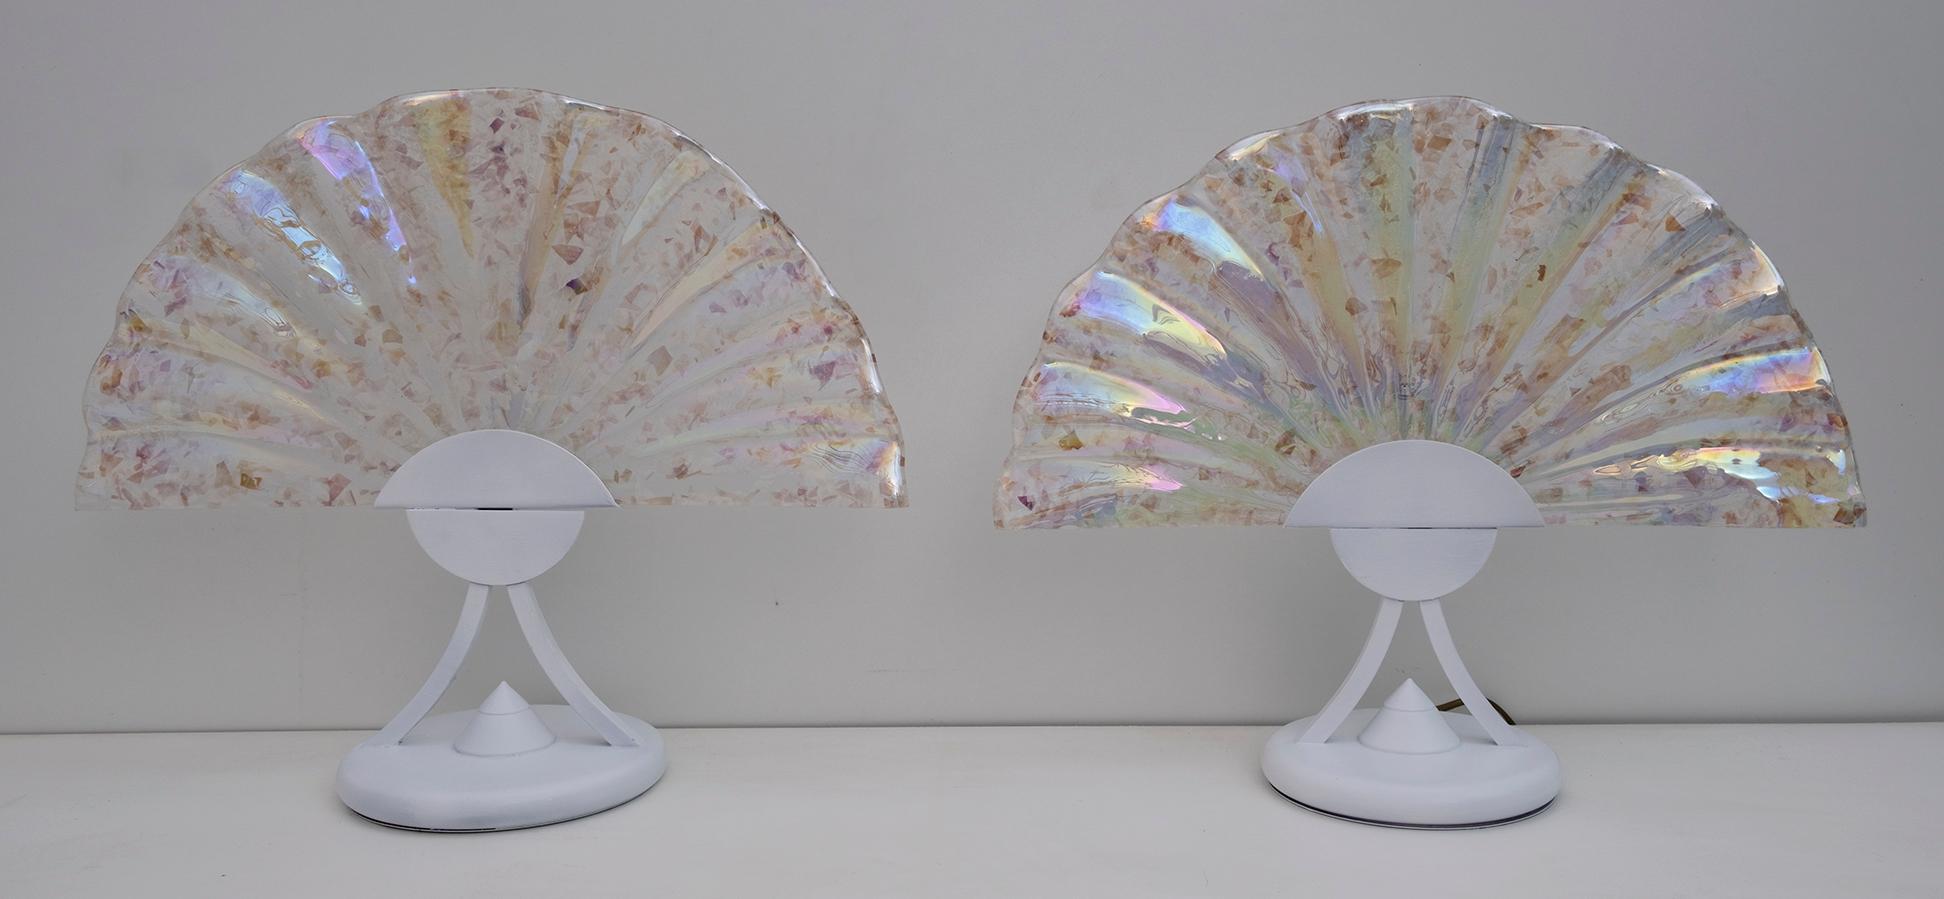 Pair of fan-shaped lamps in iridescent murano glass.